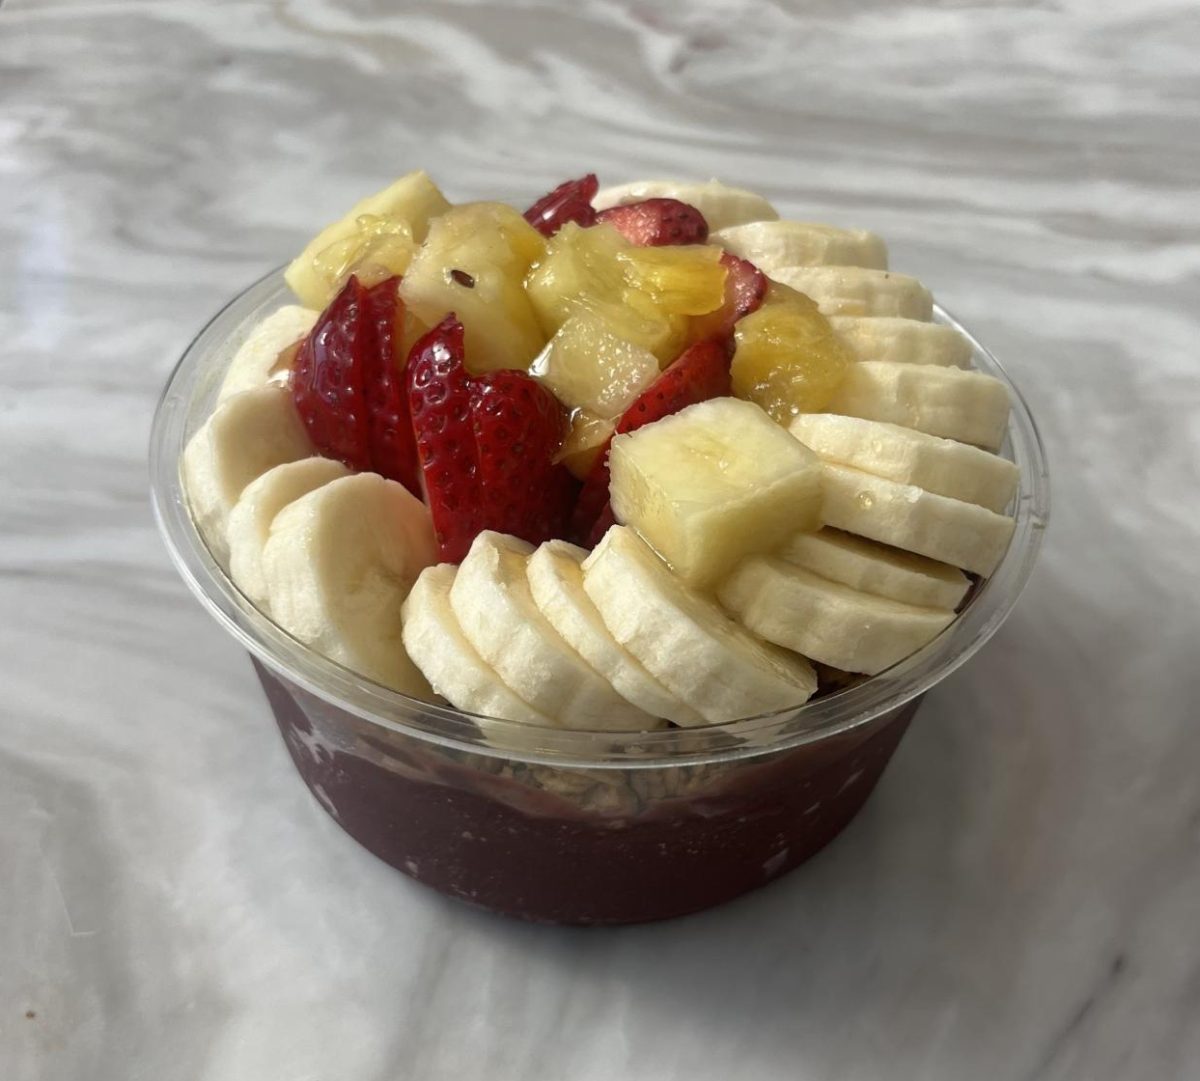 A fresh açaí bowl resting on a marble counter, laden with an array of fruit.